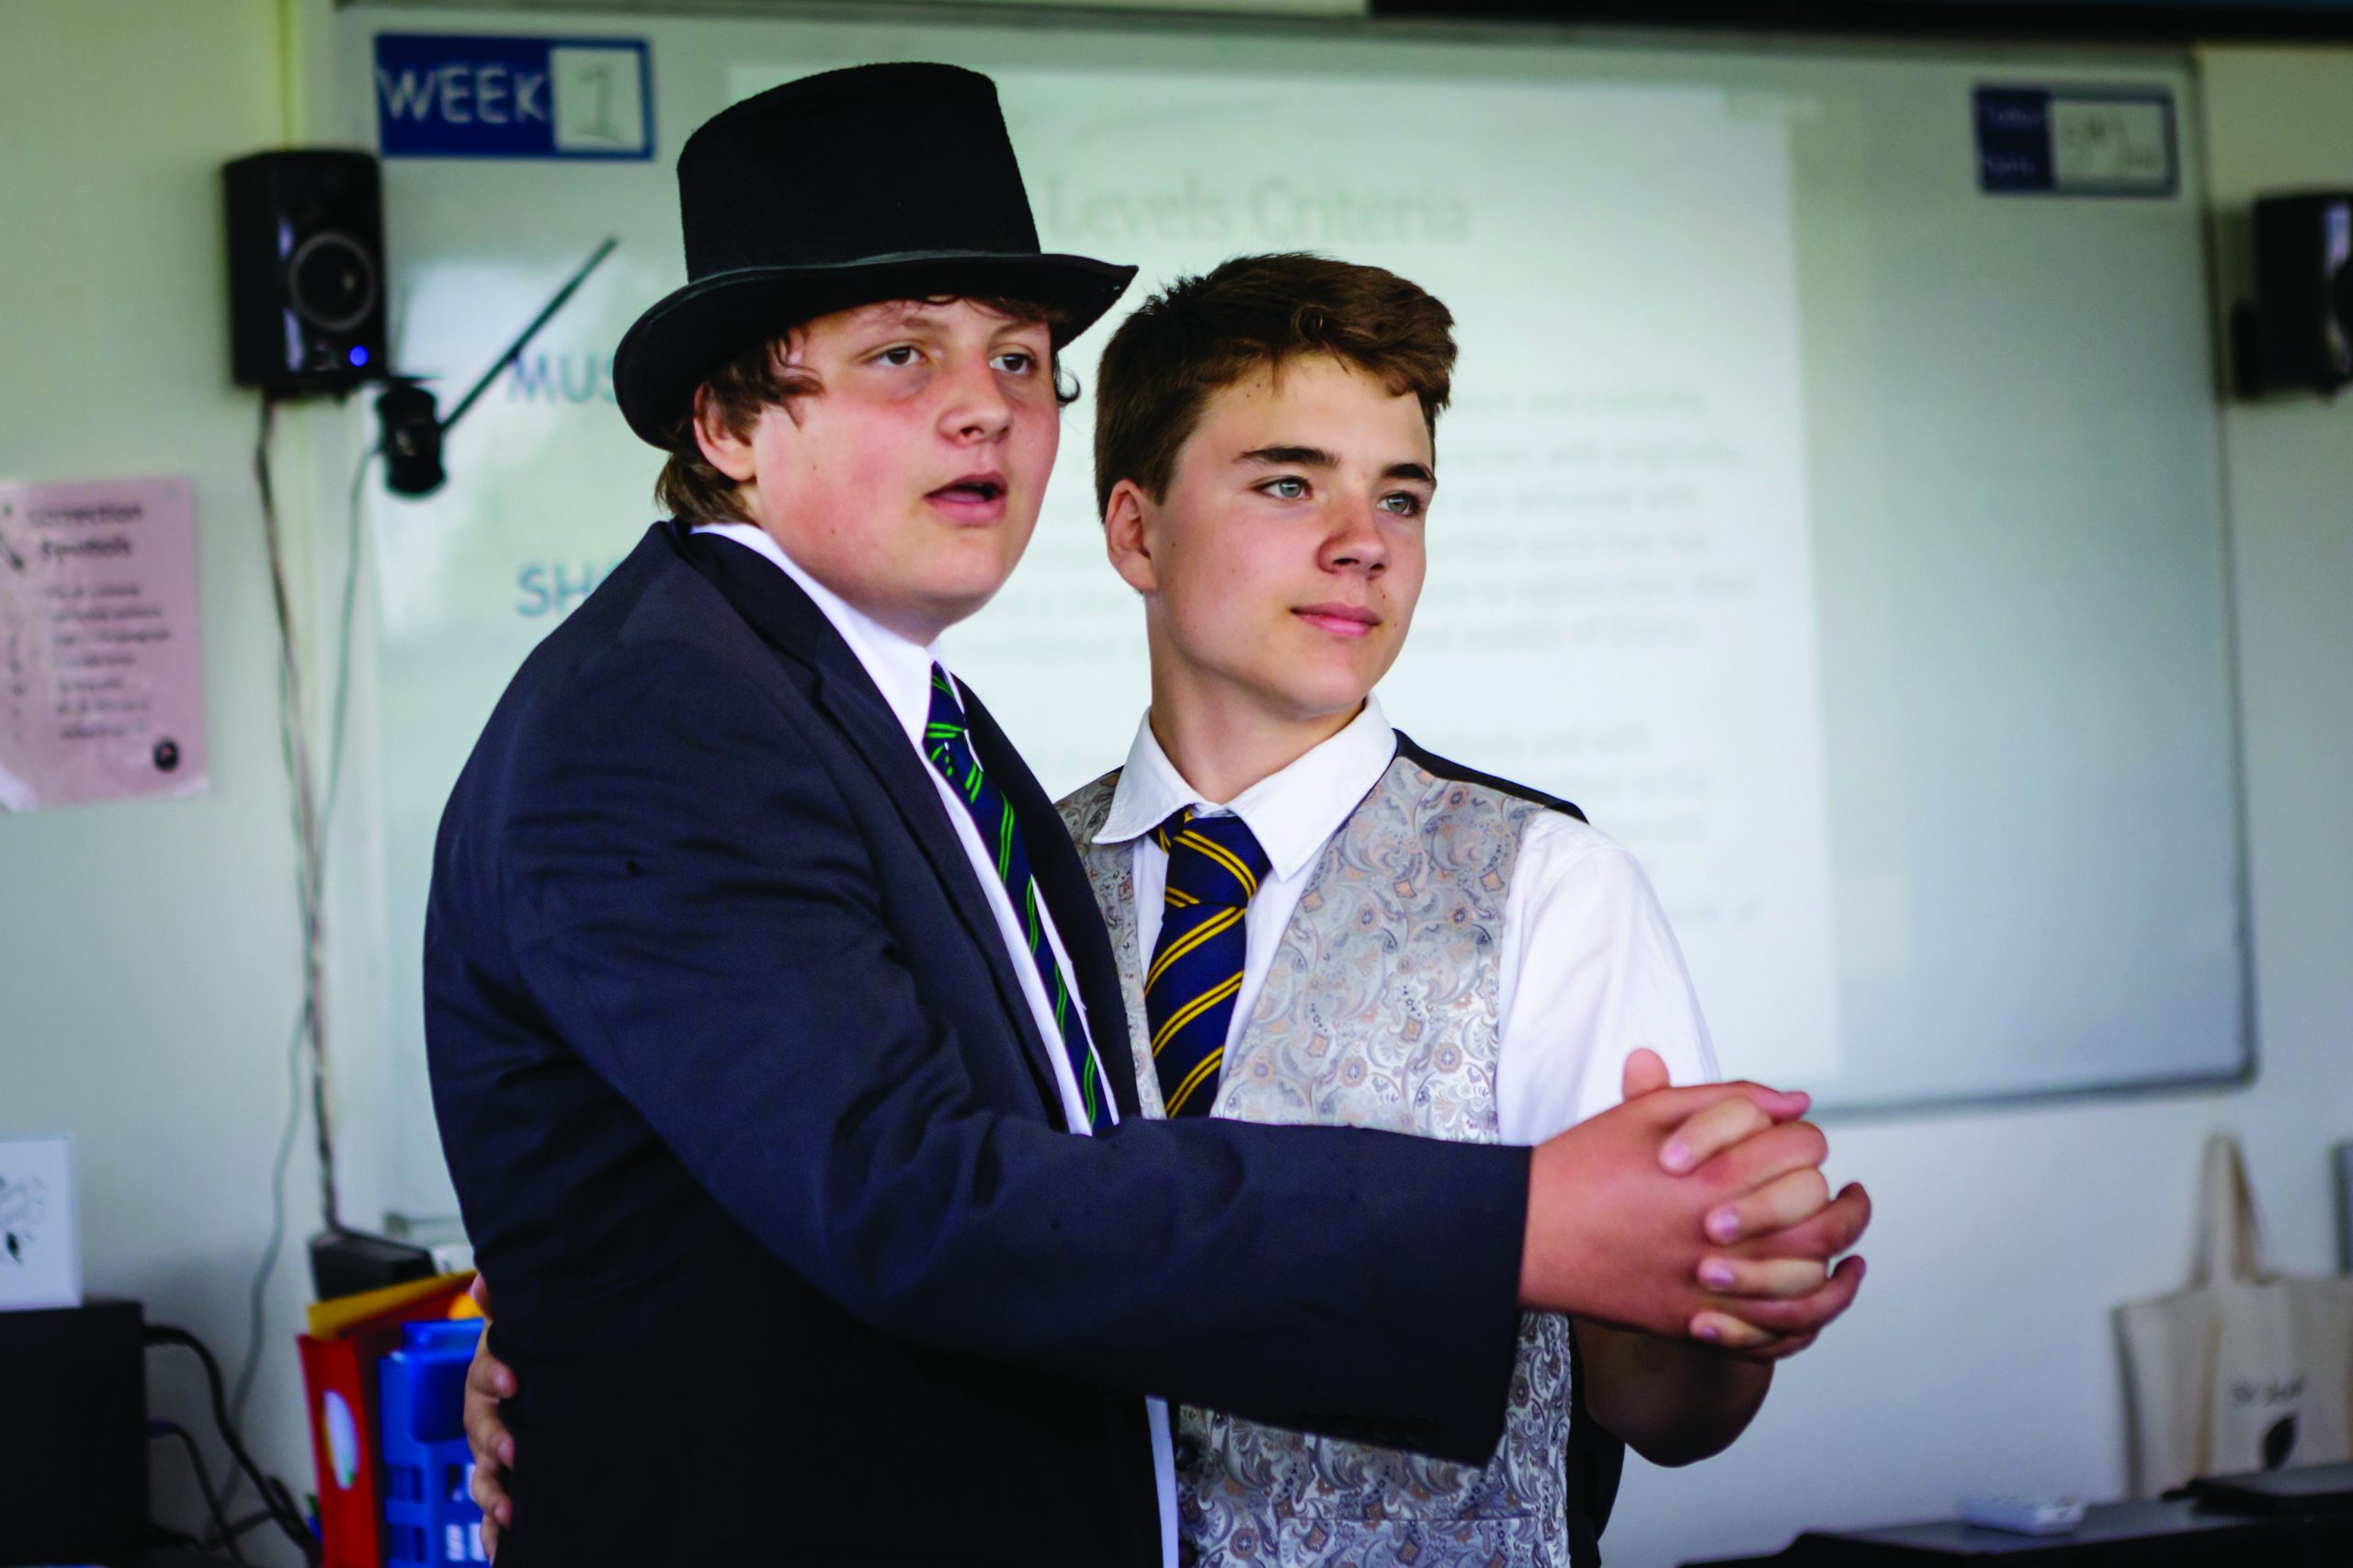 Two boys, one wearing a top hat, rehearsing in the drama room